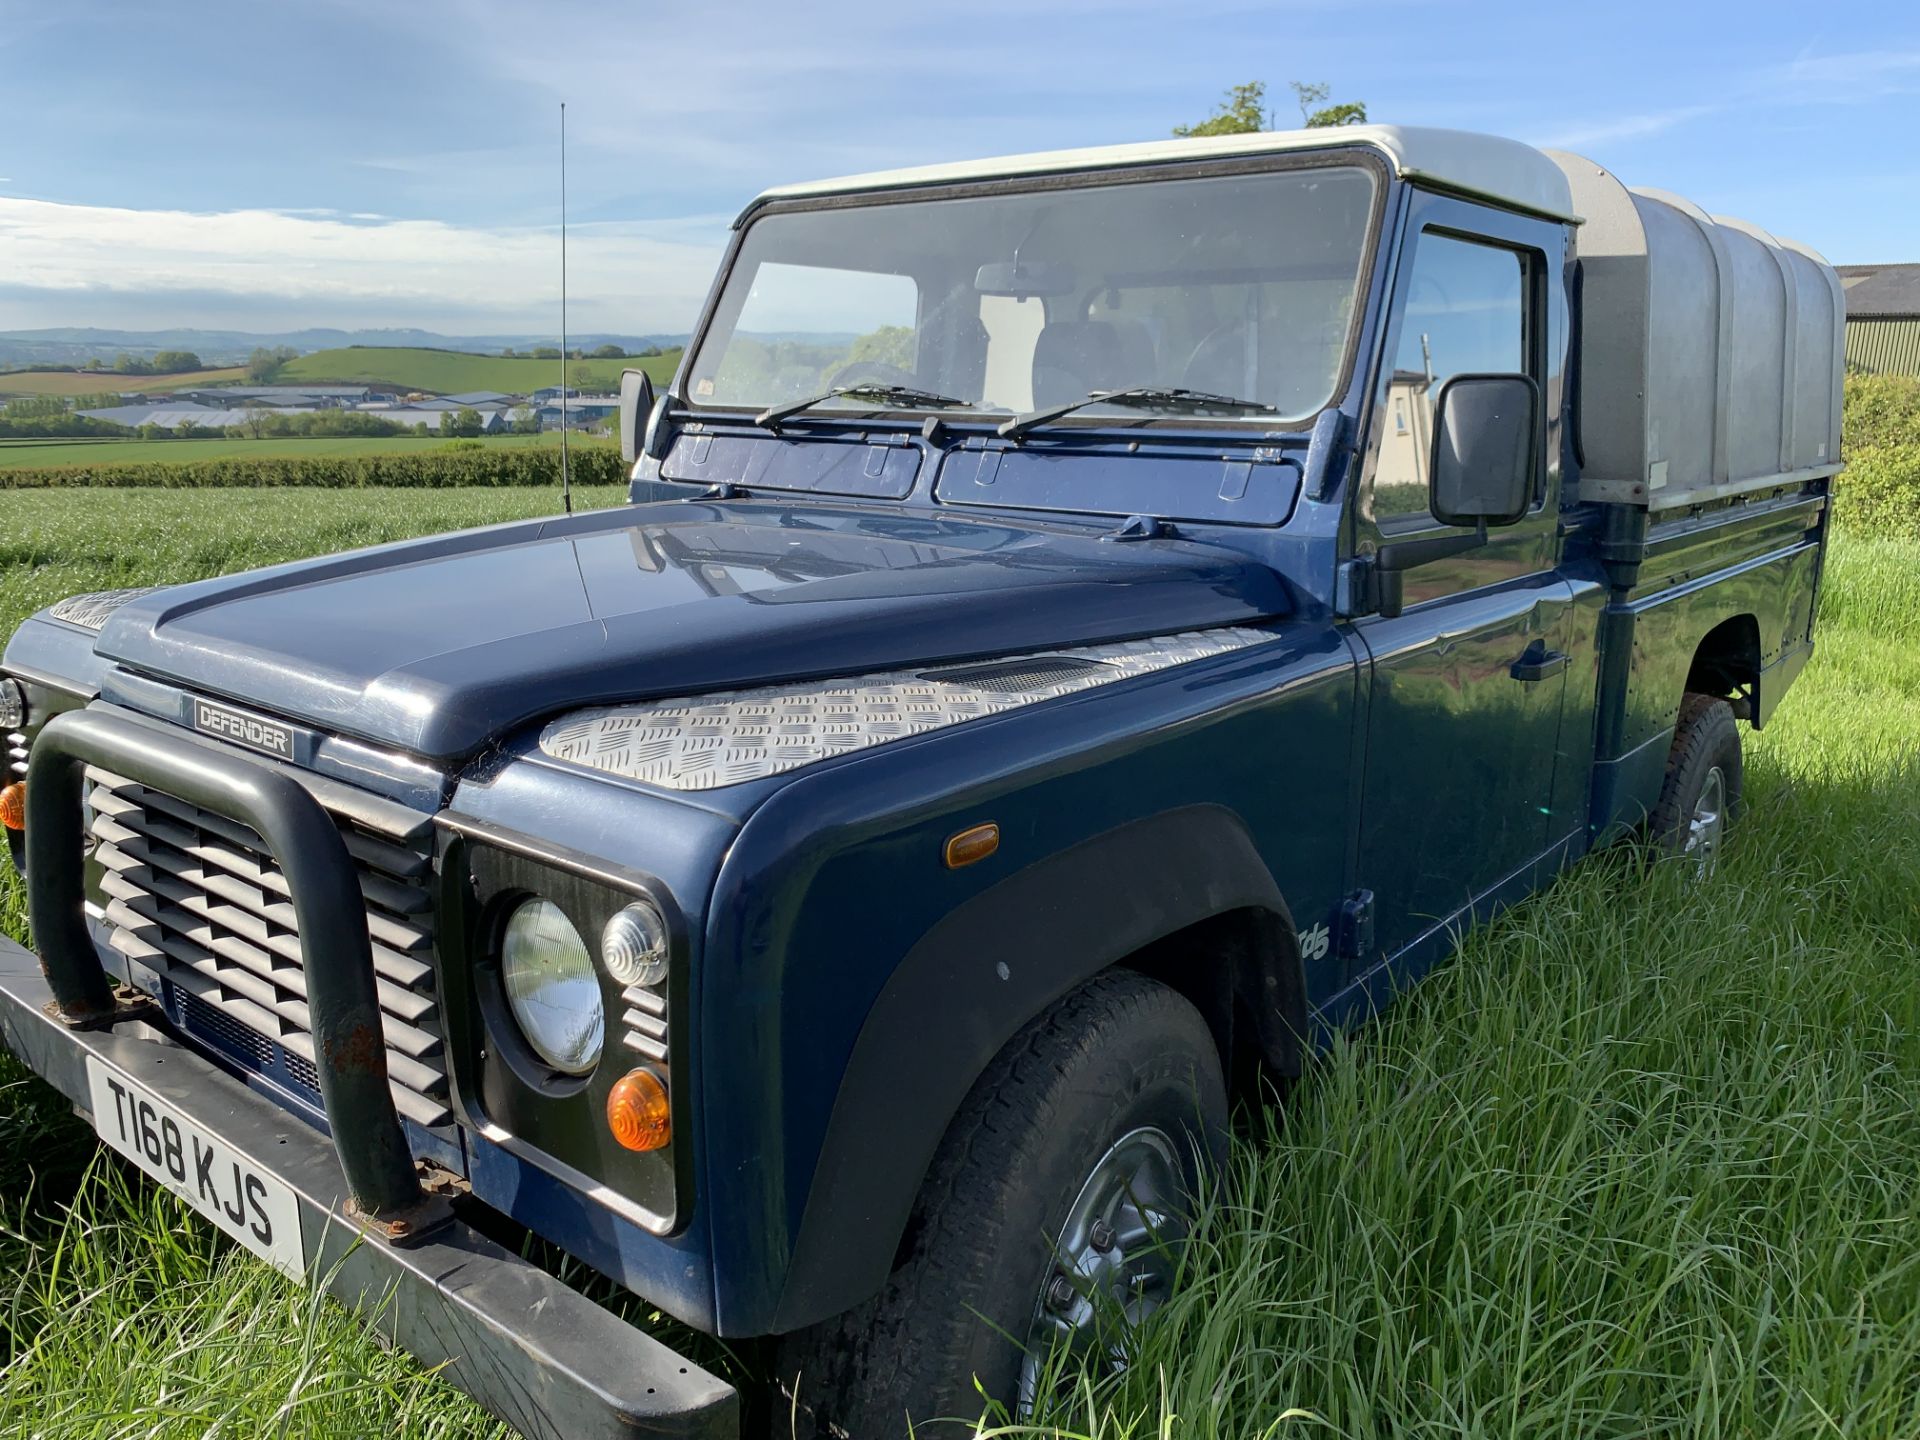 110 Land Rover TD5 high capacity - Image 7 of 9